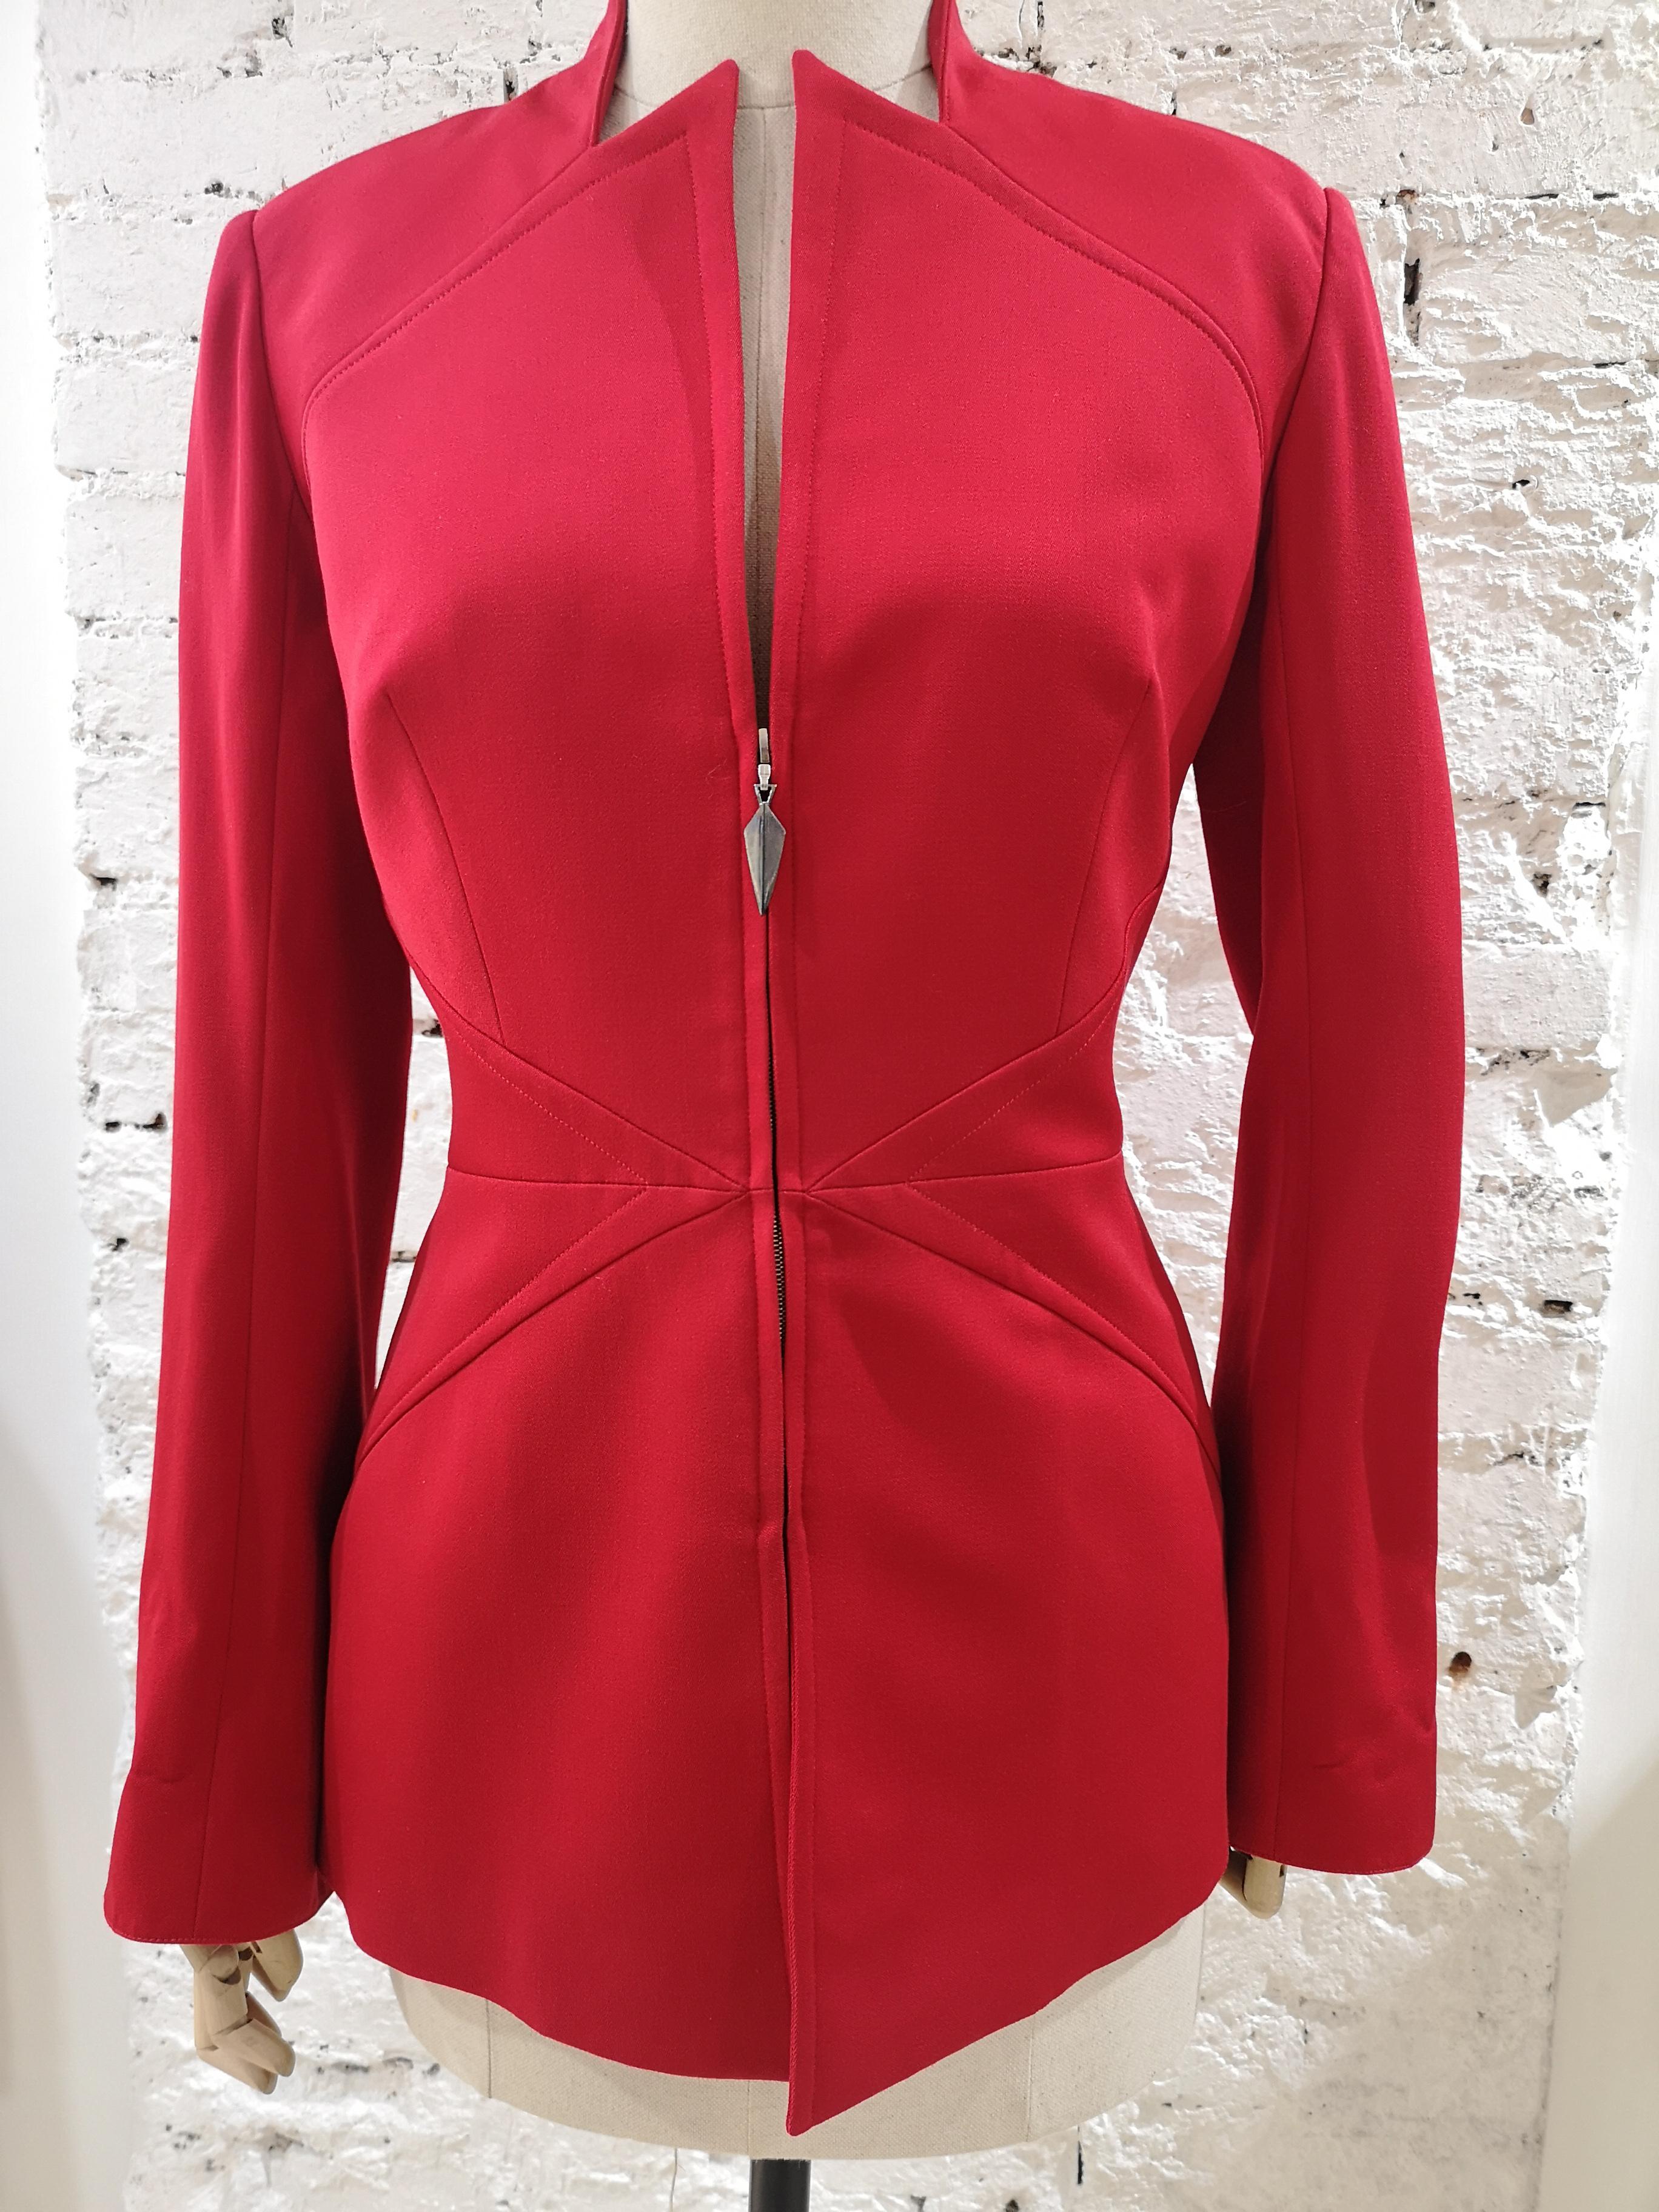 red jacket for sale